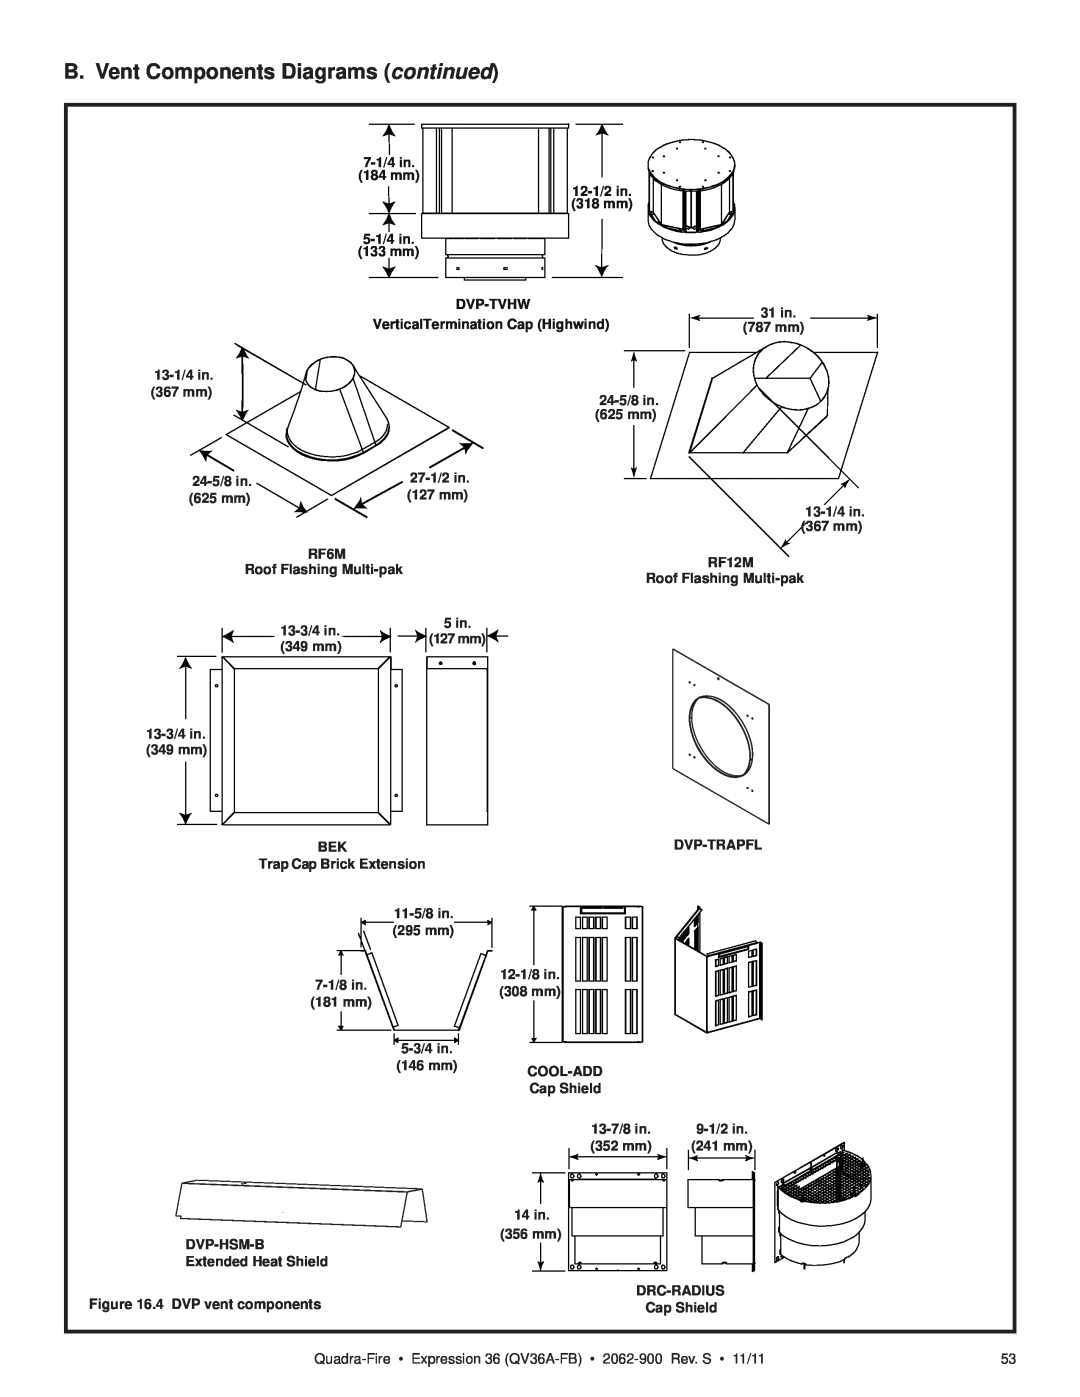 Quadra-Fire QV36A-FB B. Vent Components Diagrams continued, 12-1/2in, 318 mm, 31 in, 787 mm, 13-1/4in, 367 mm, 24-5/8in 